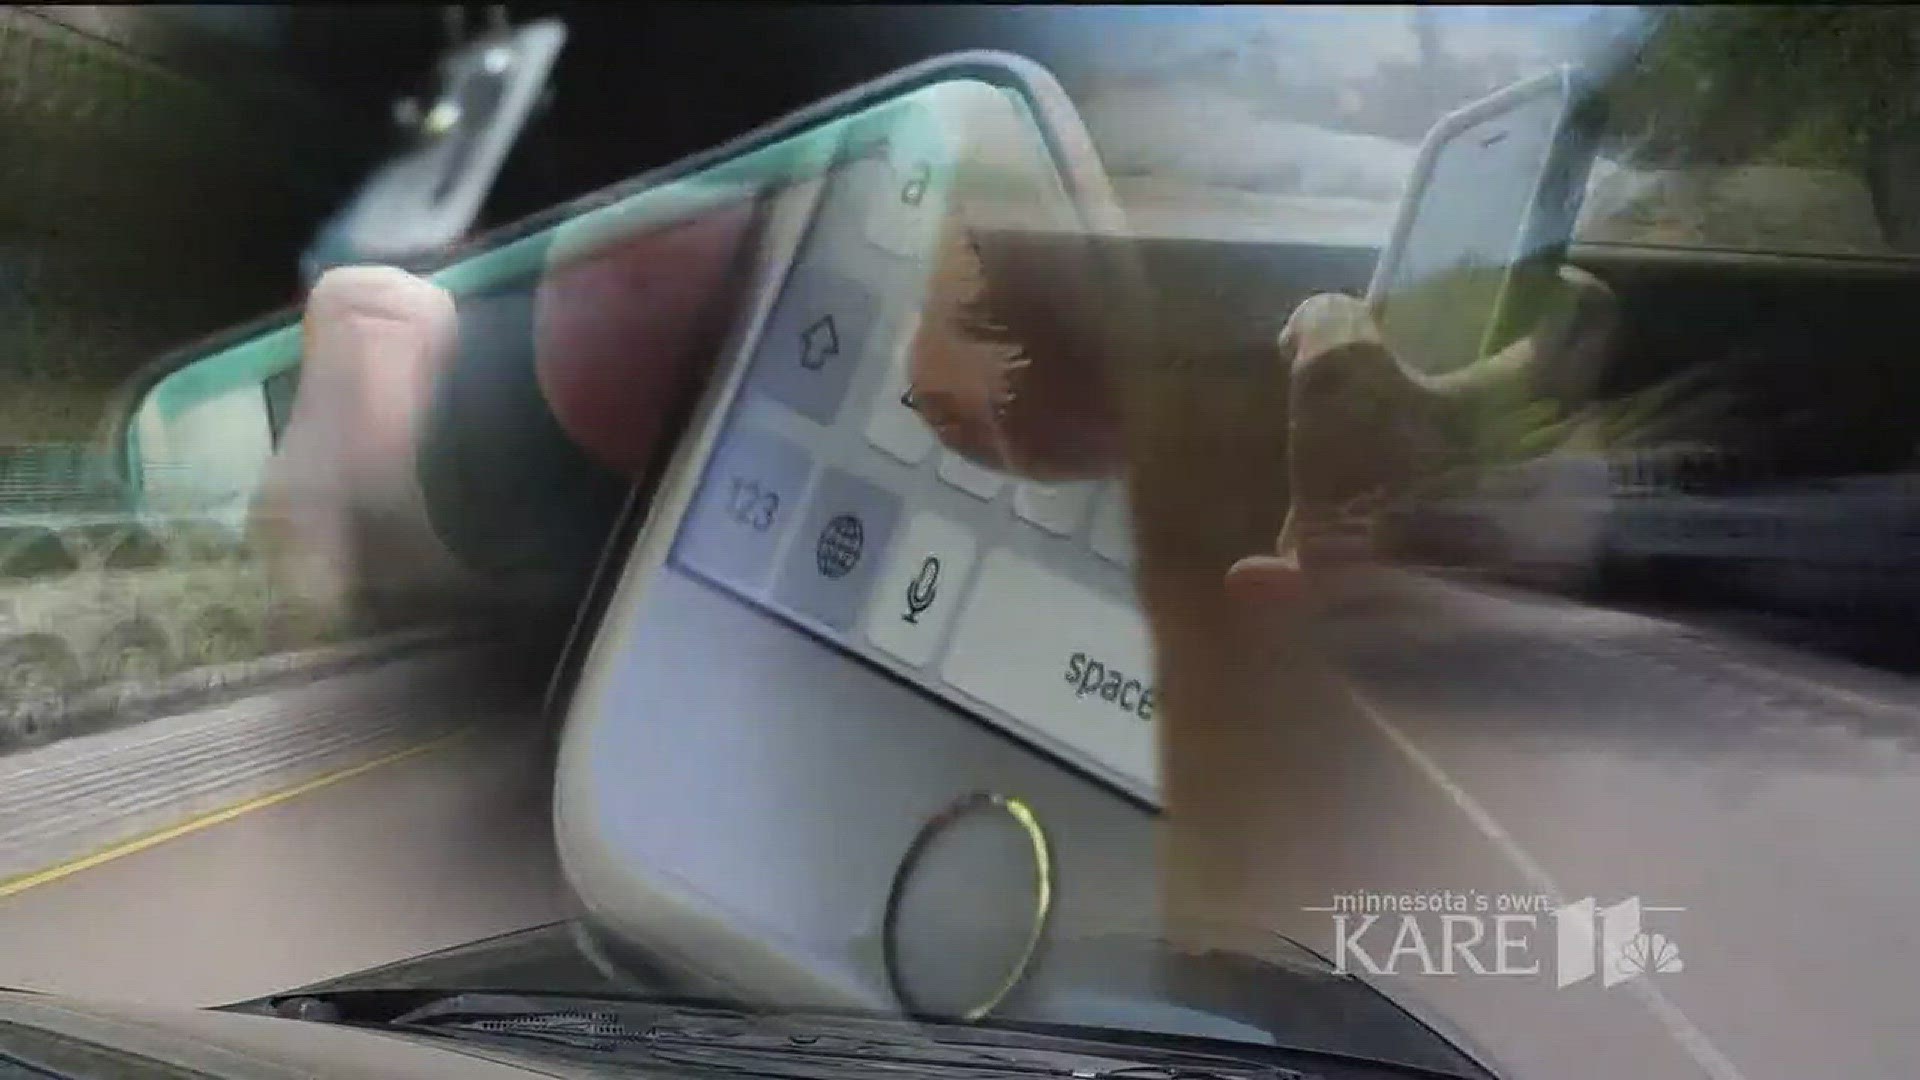 The Washington State law makes it illegal for a driver to hold an electronic device in even when stopped at an intersection or in traffic, which closes loopholes in other state laws. http://kare11.tv/2uT3mfg